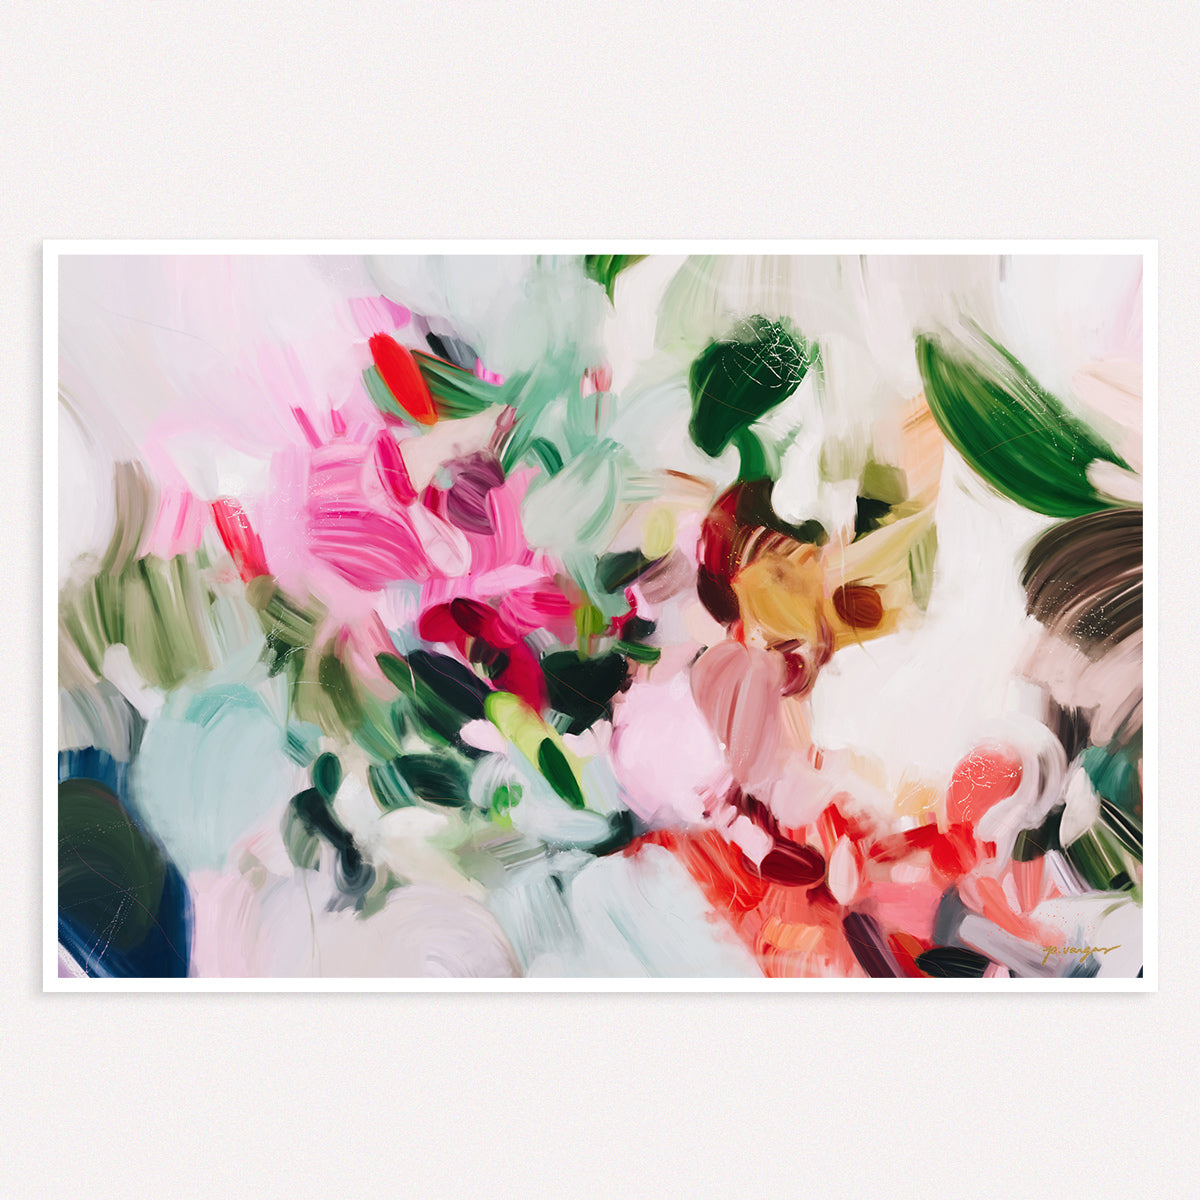 Bloom, colorful abstract art print by Parima Studio